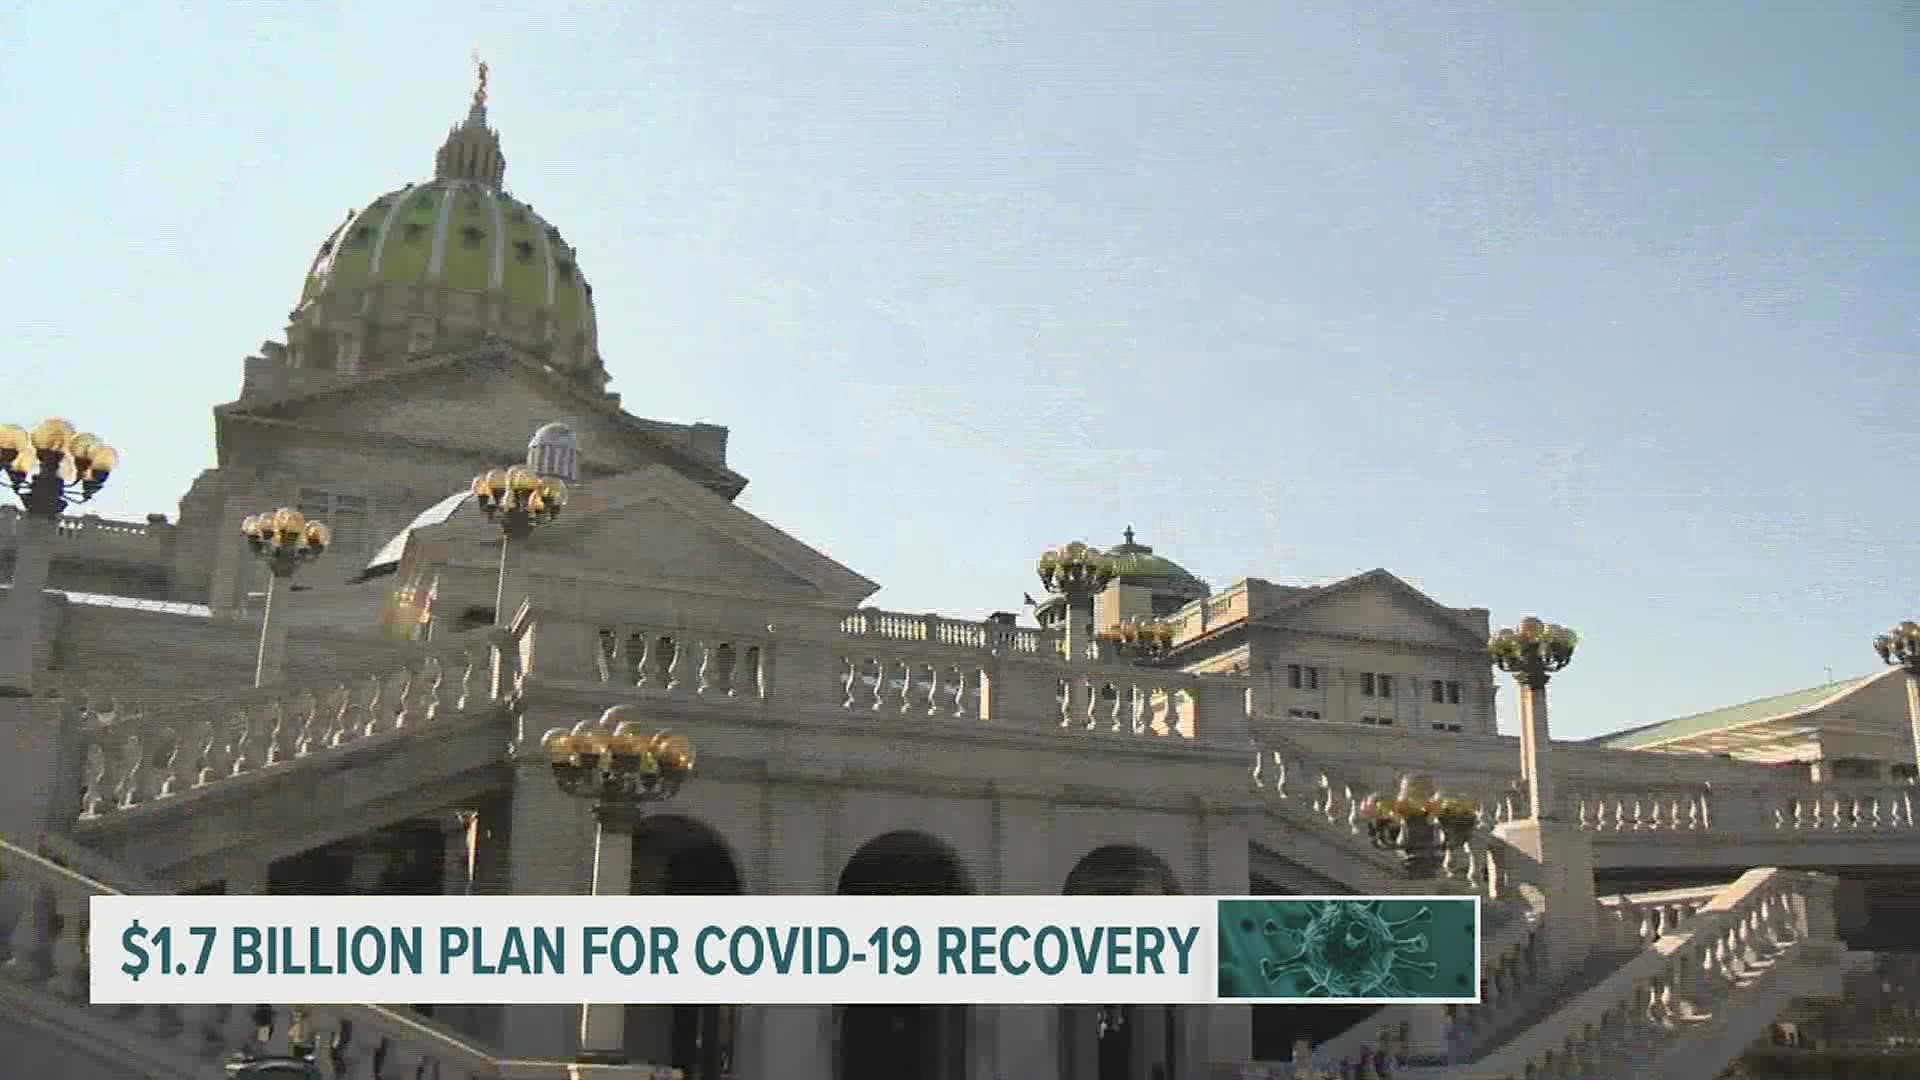 Gov. Wolf's $1.7 billion plan to help Pennsylvania recover from the pandemic is causing a divide across the political aisle.